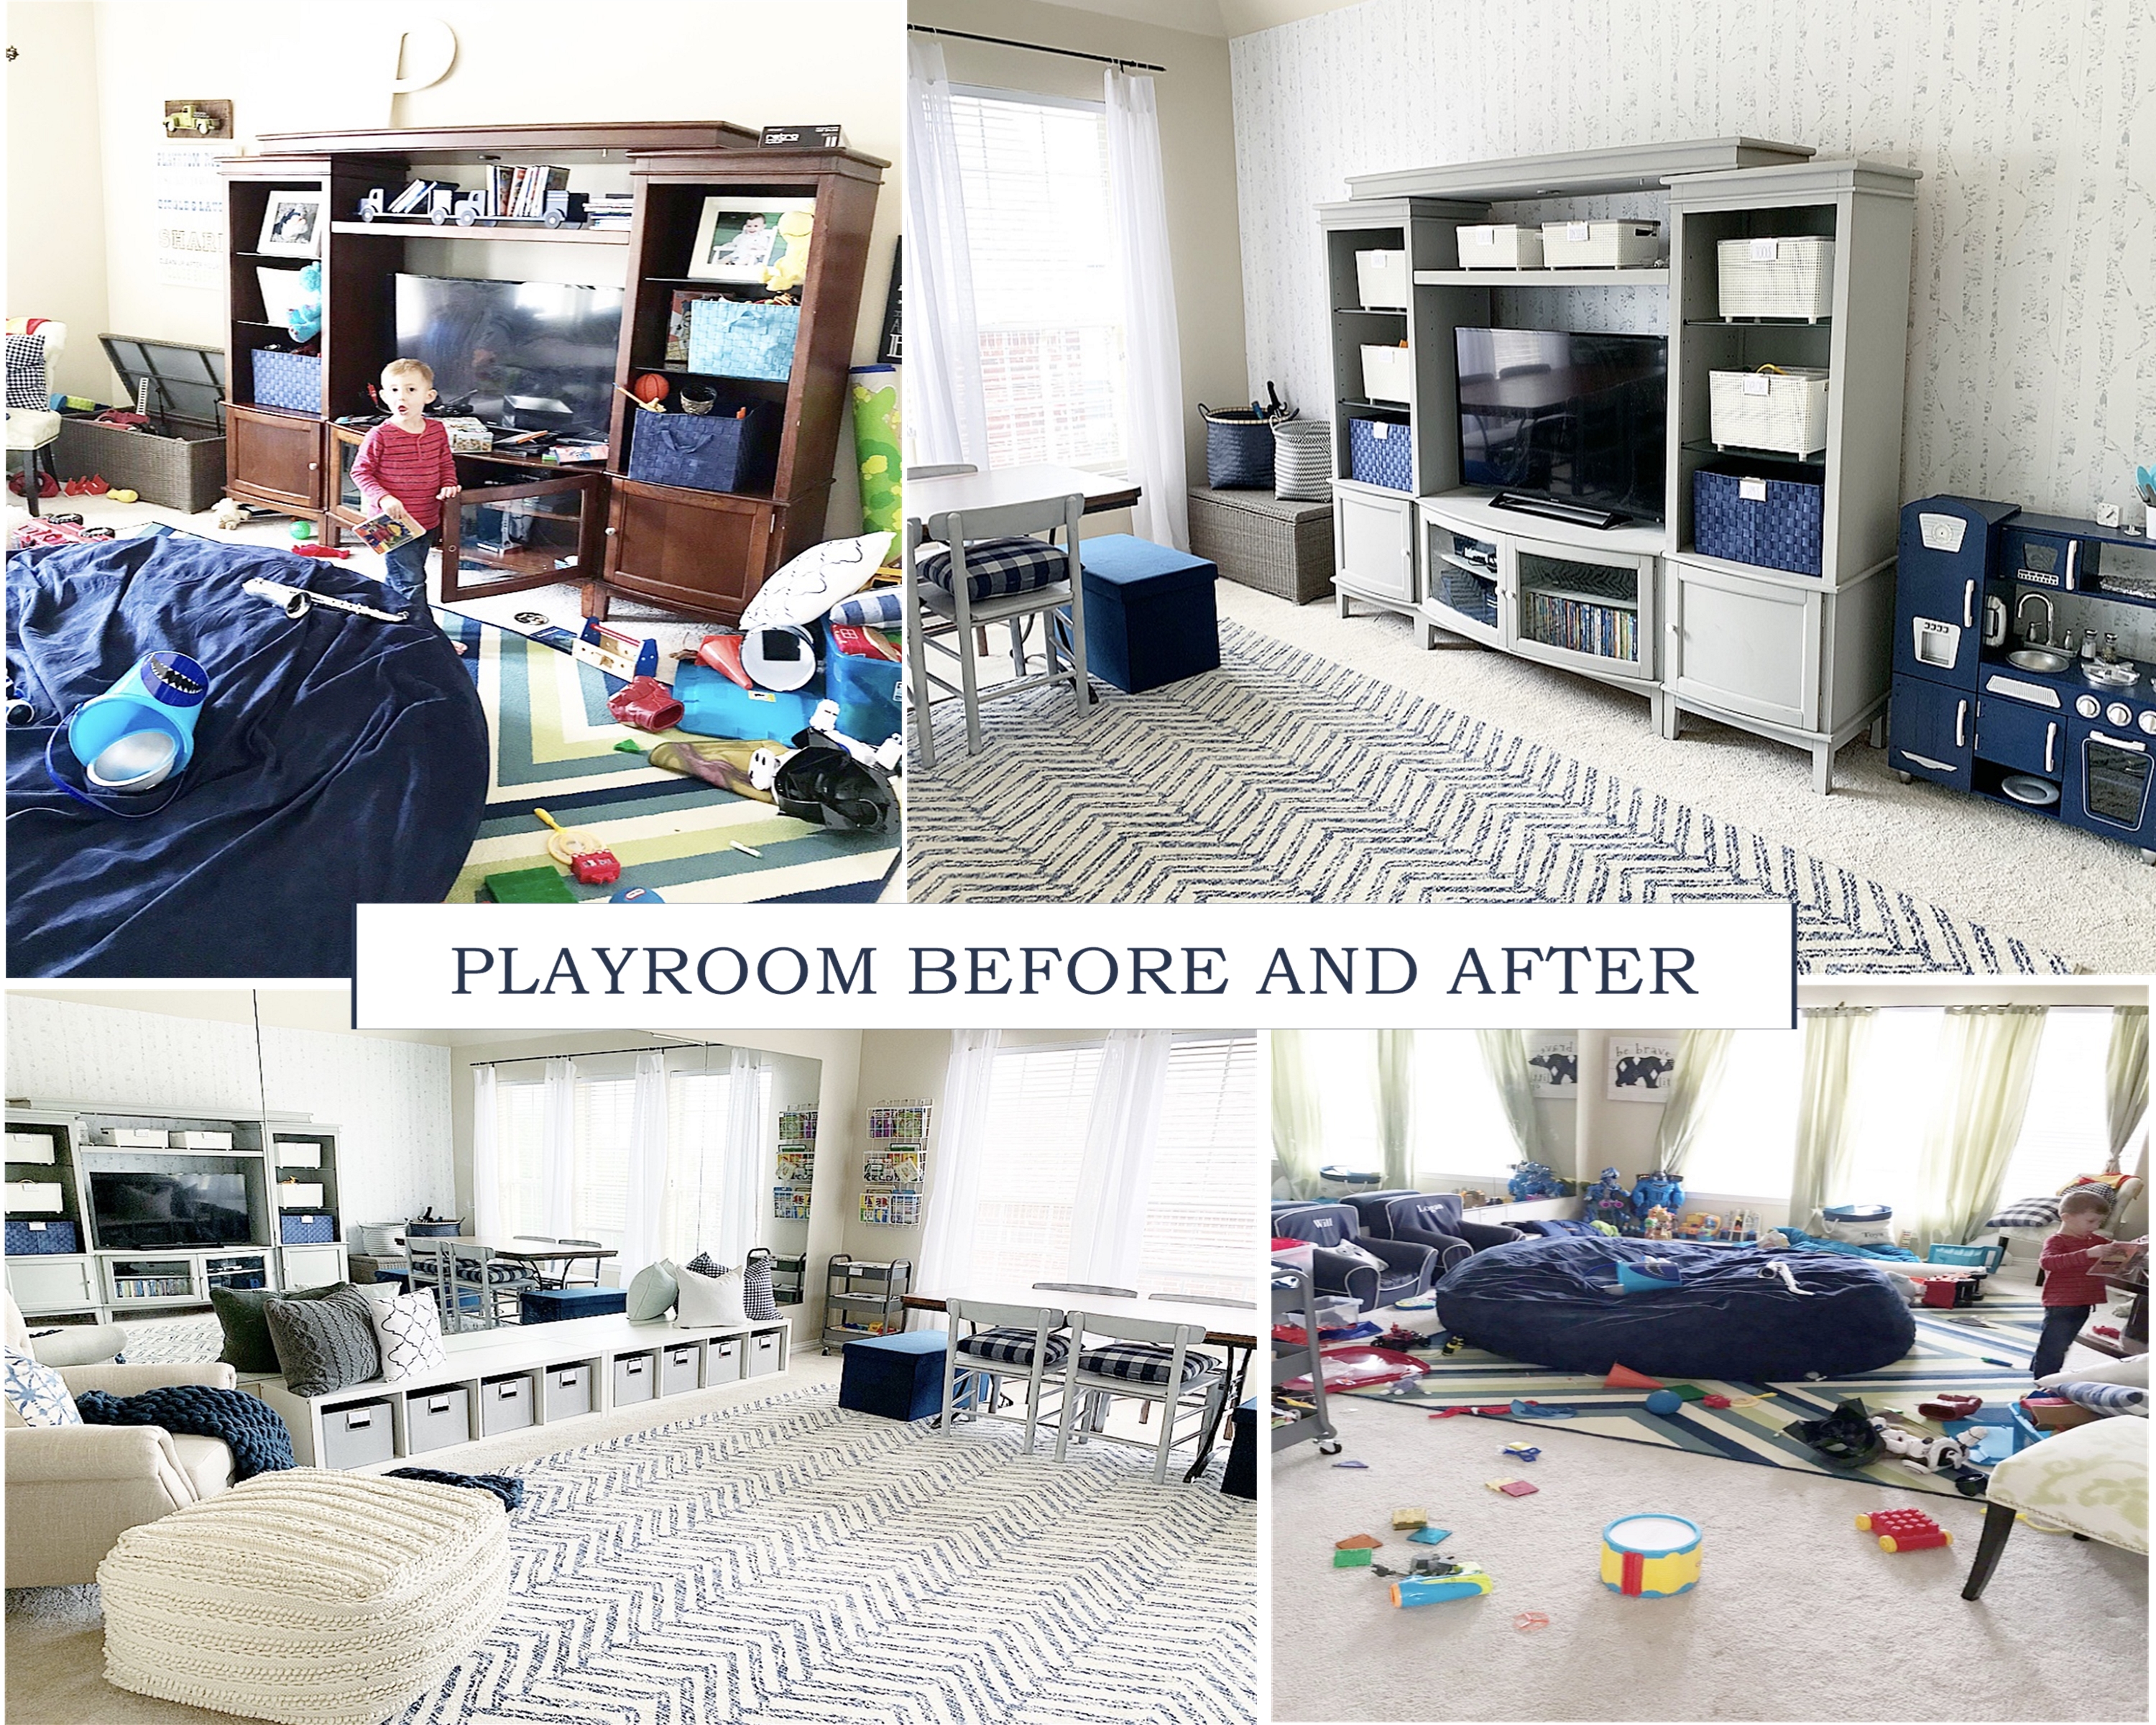 http://crispcollective.org/wp-content/uploads/2019/02/Playroom-before-and-after.jpg